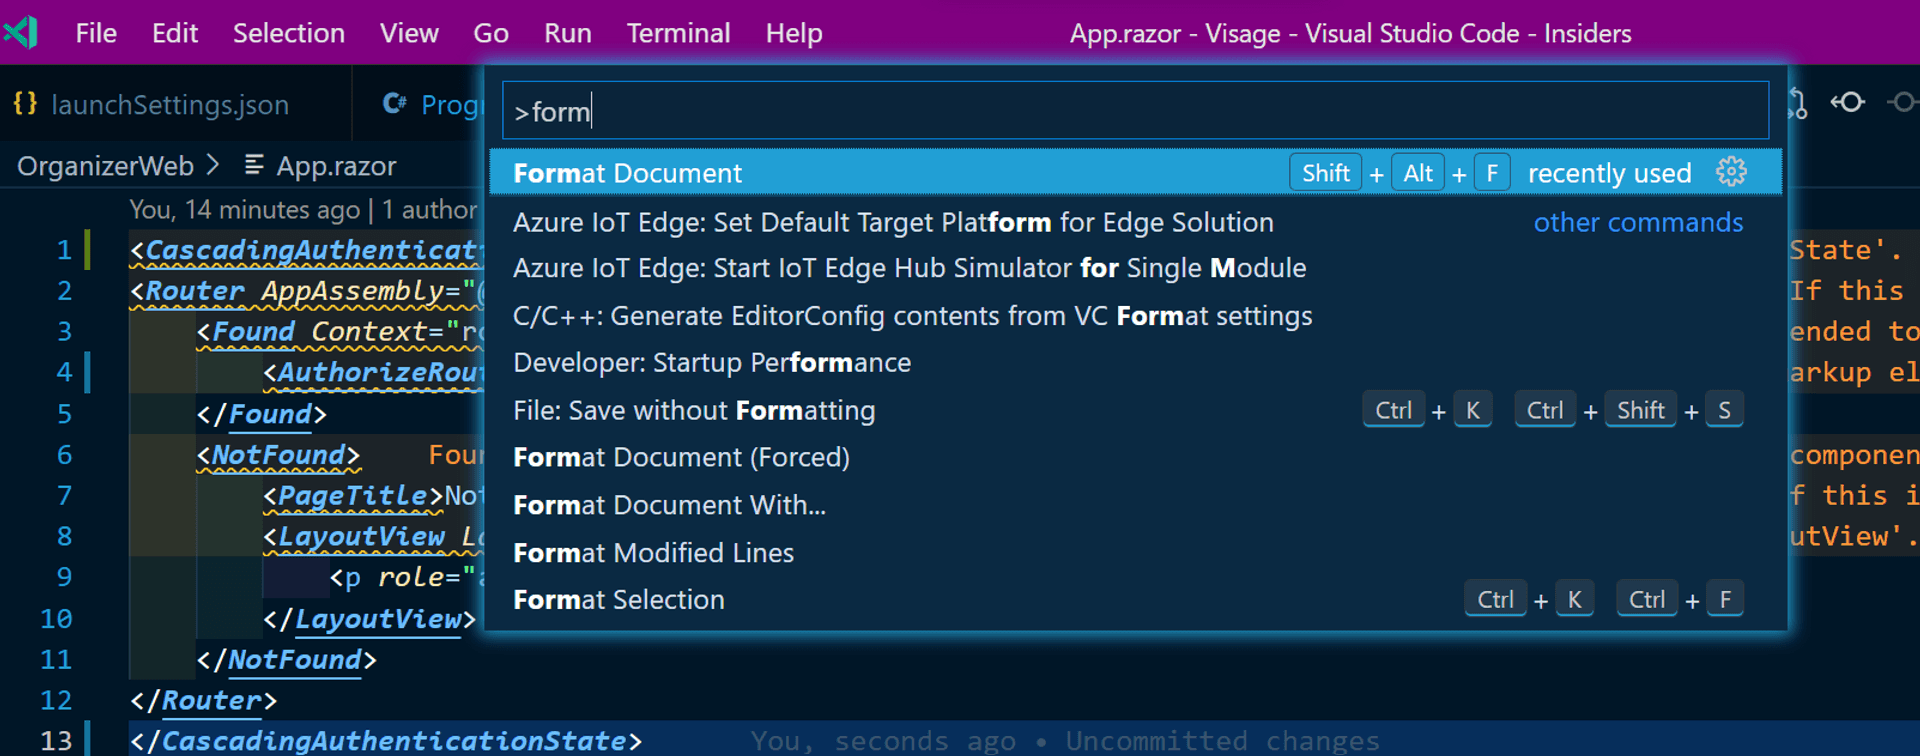 VS Code Command Palette dropdown with Format Document as the first option